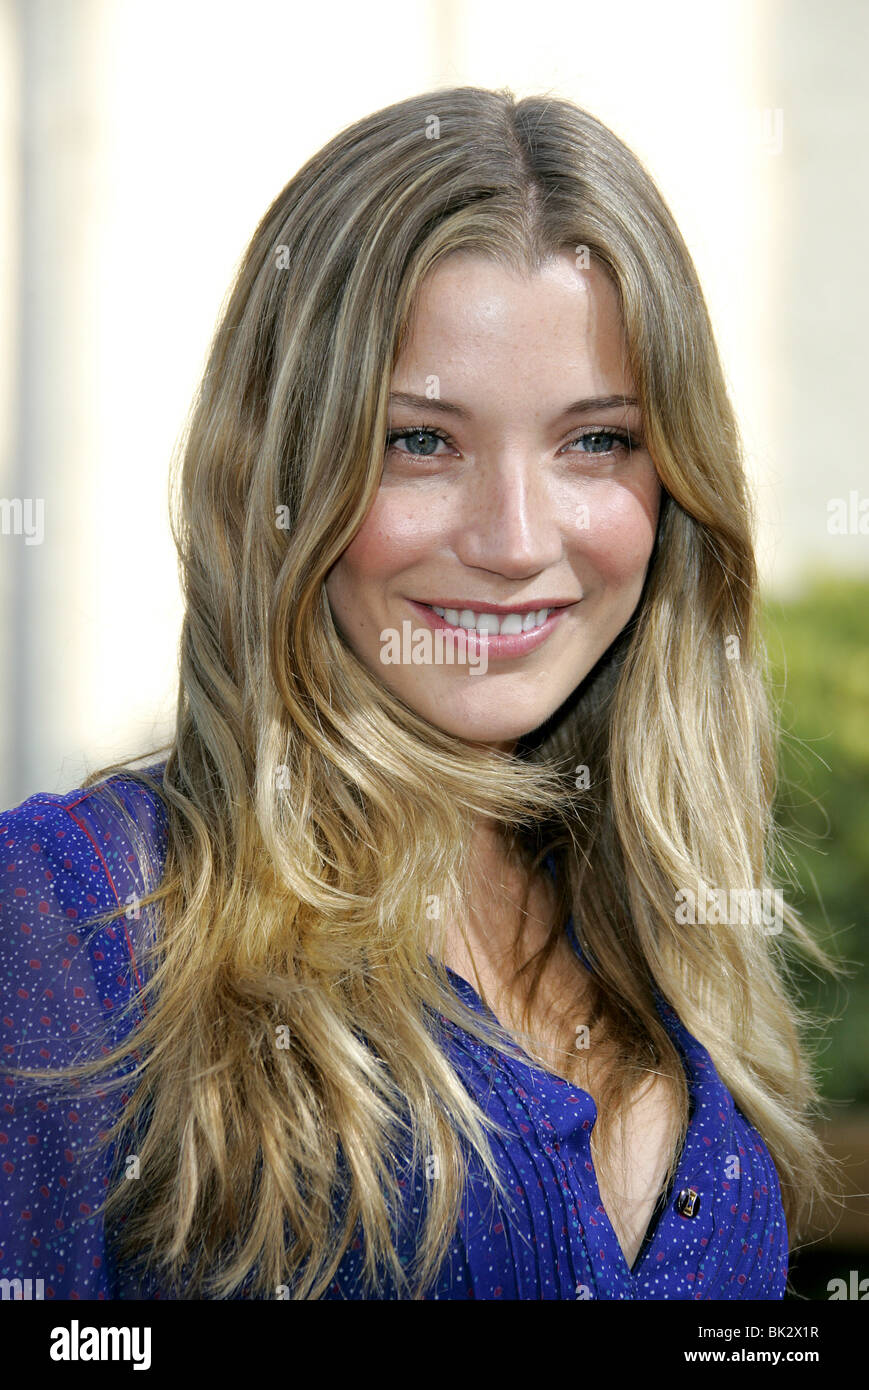 SARAH ROEMER THE GRUDGE 2 FILM PREMIERE KNOTTS SCARY FARM BUENA PARK LOS ANGELES USA 08 October 2006 Stock Photo